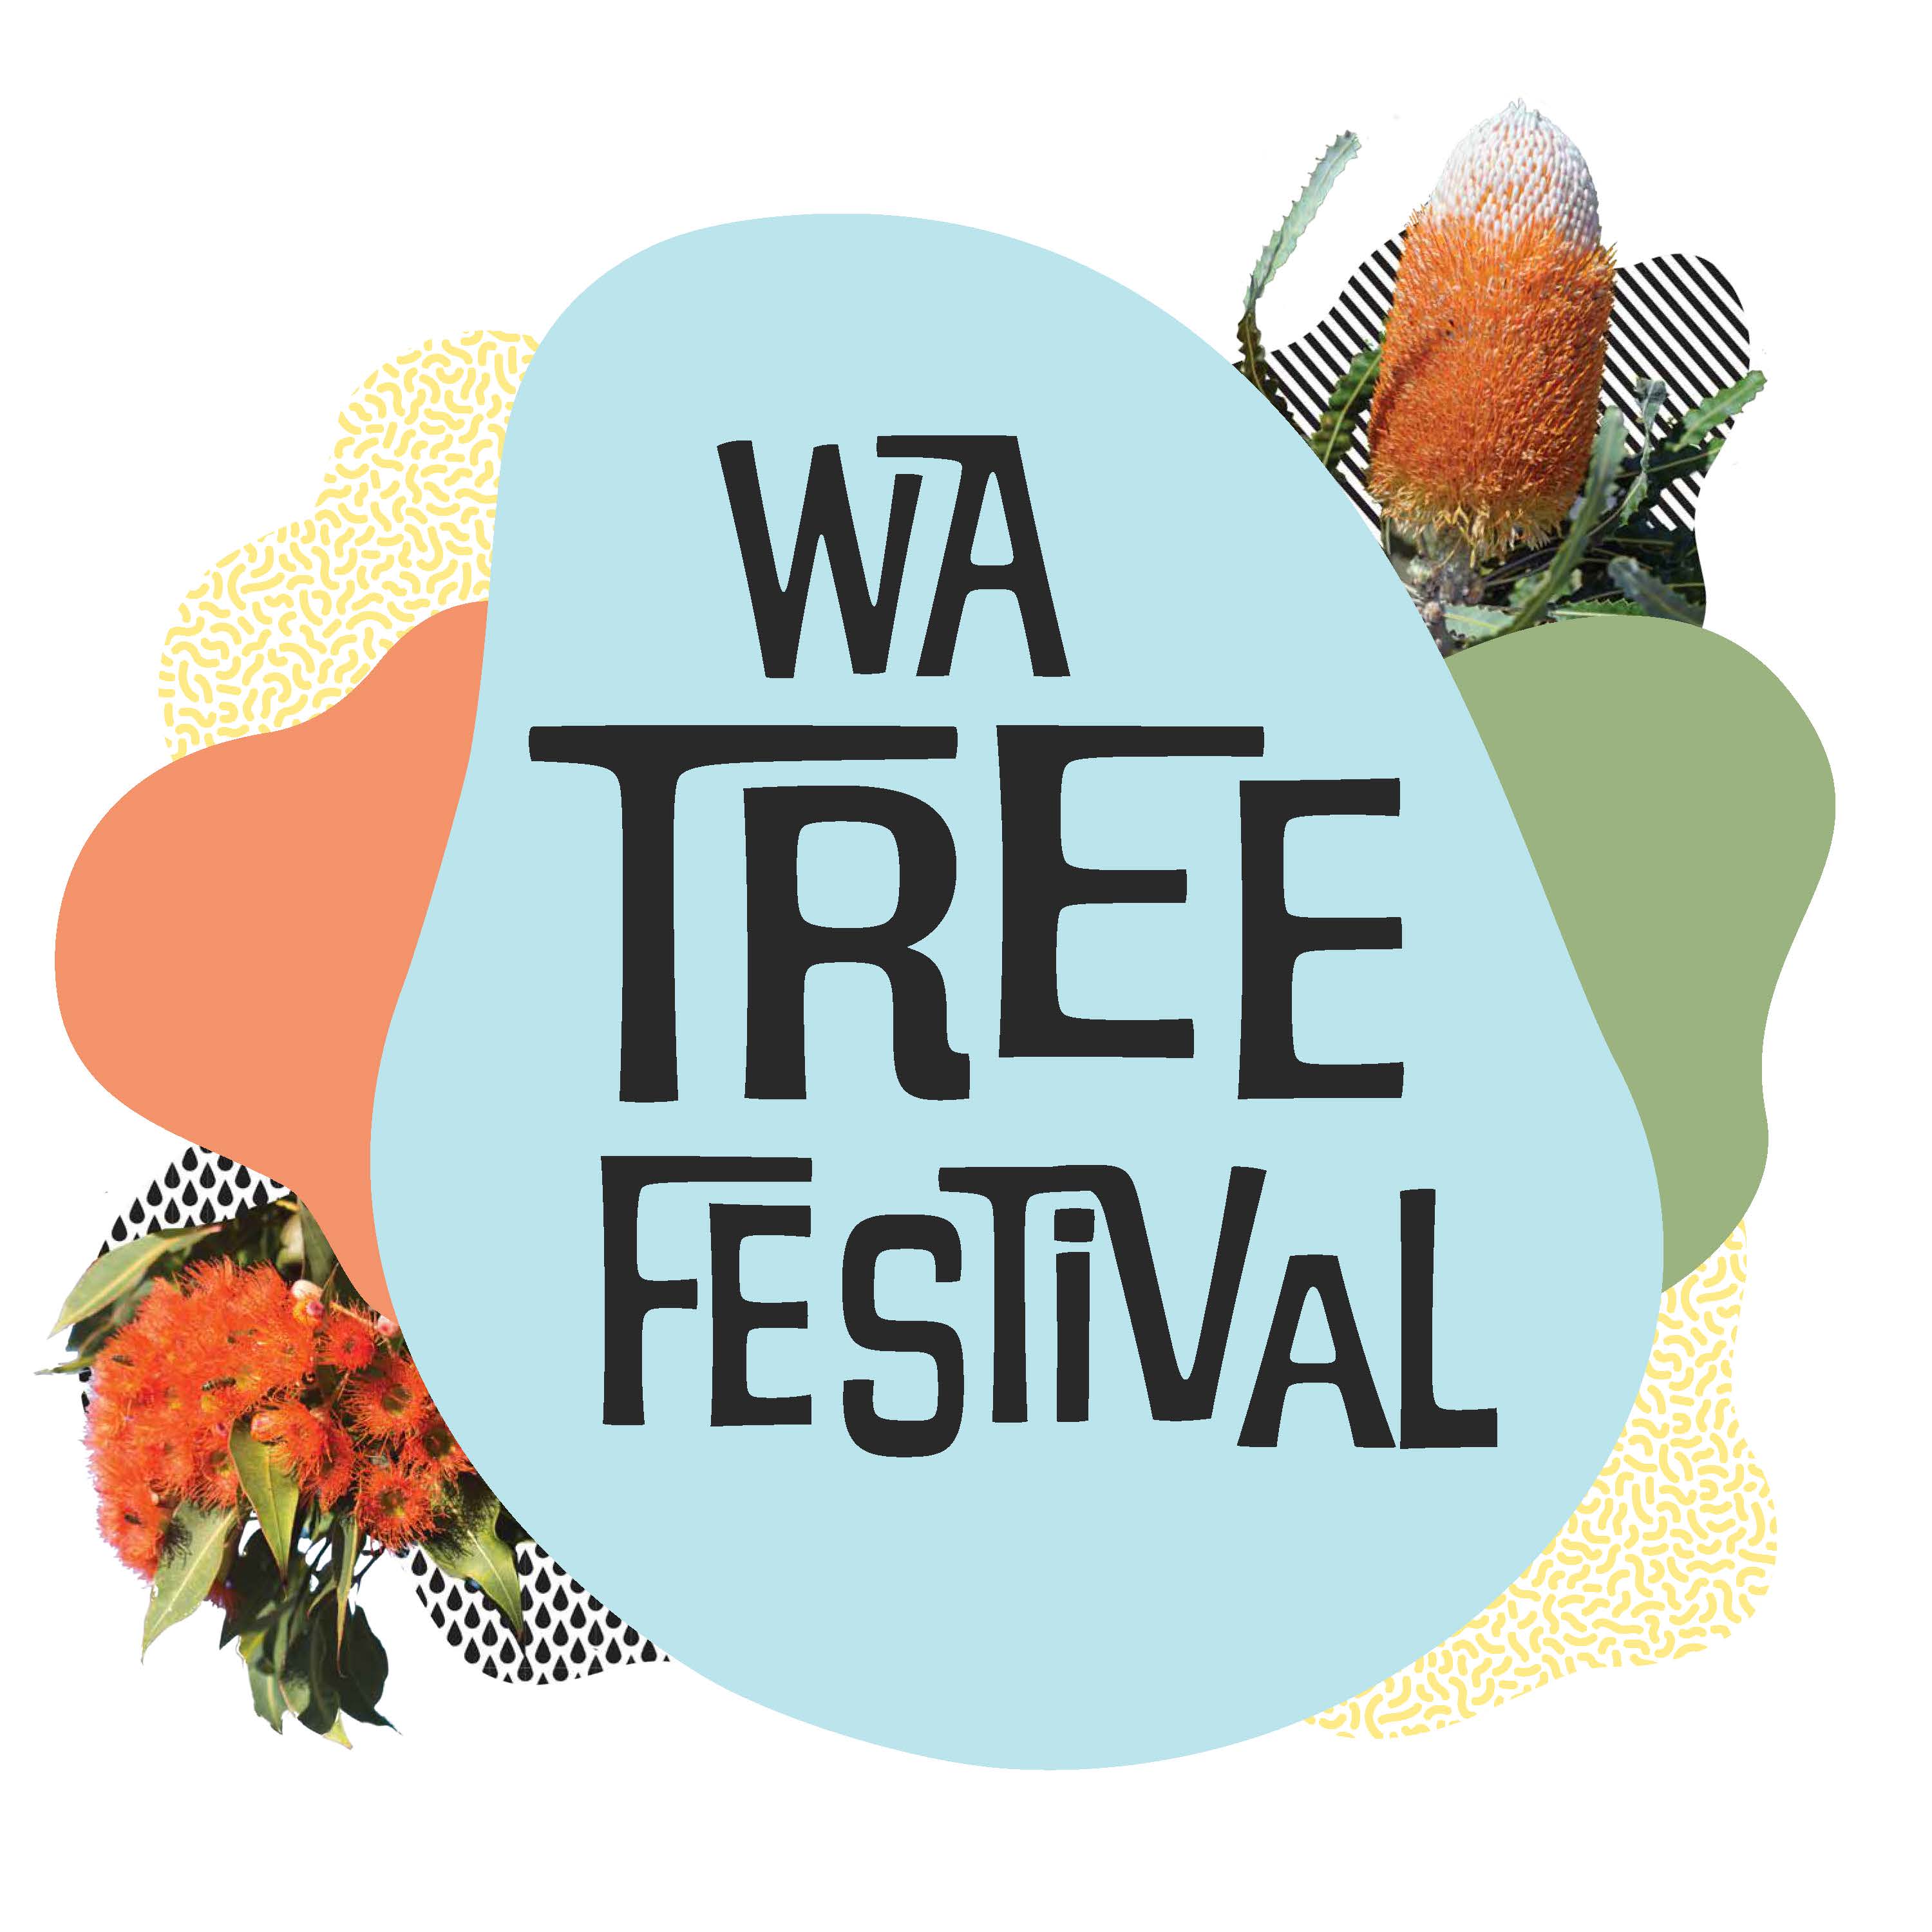 WA Tree Festival logo with shapes and colours and flowers